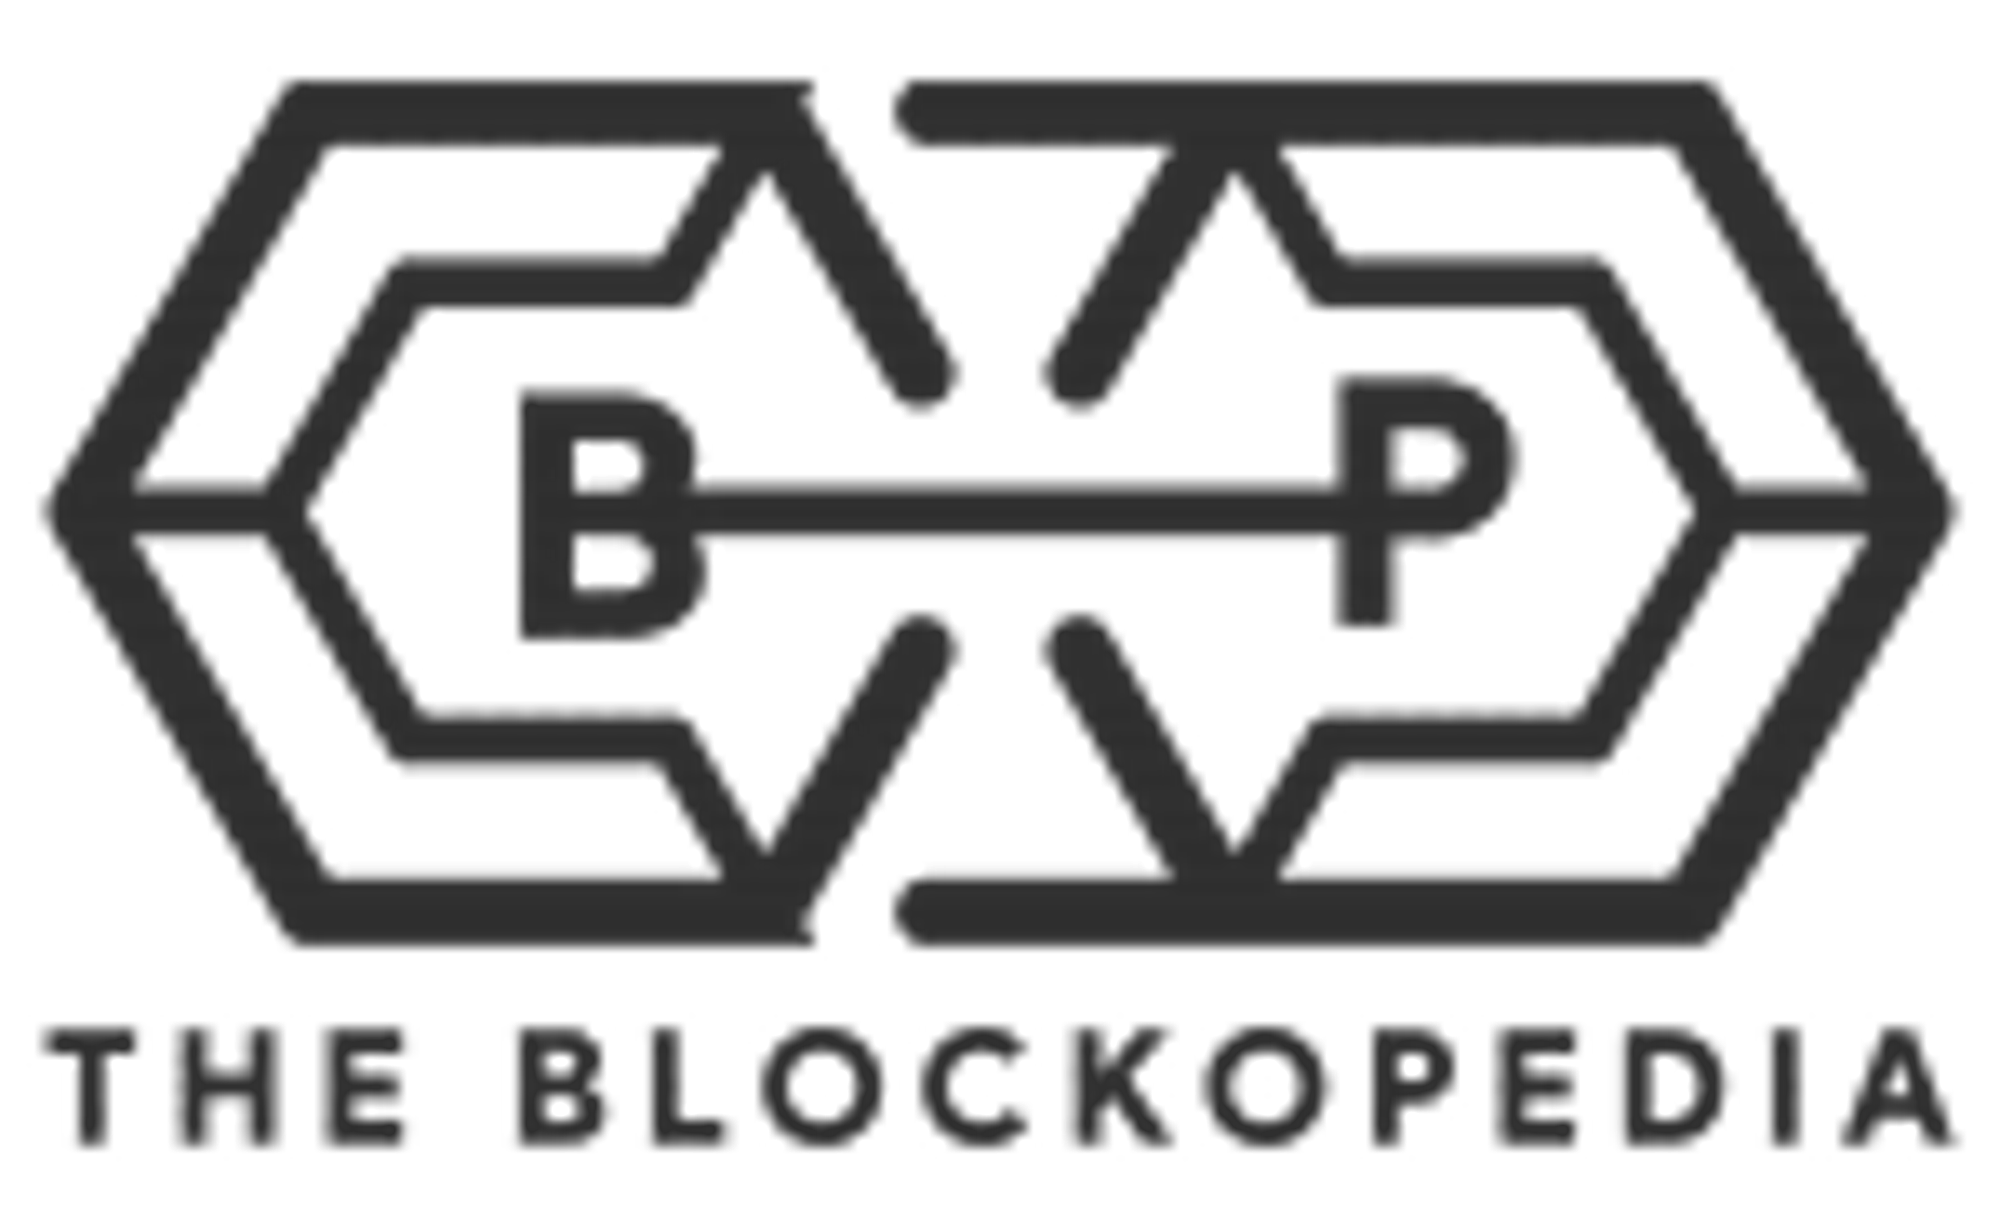 Shardeum Validator Nodes Now Available on Zeeve: Simplifying Deployment & Participation for Sphinx Betanet - The Blockopedia